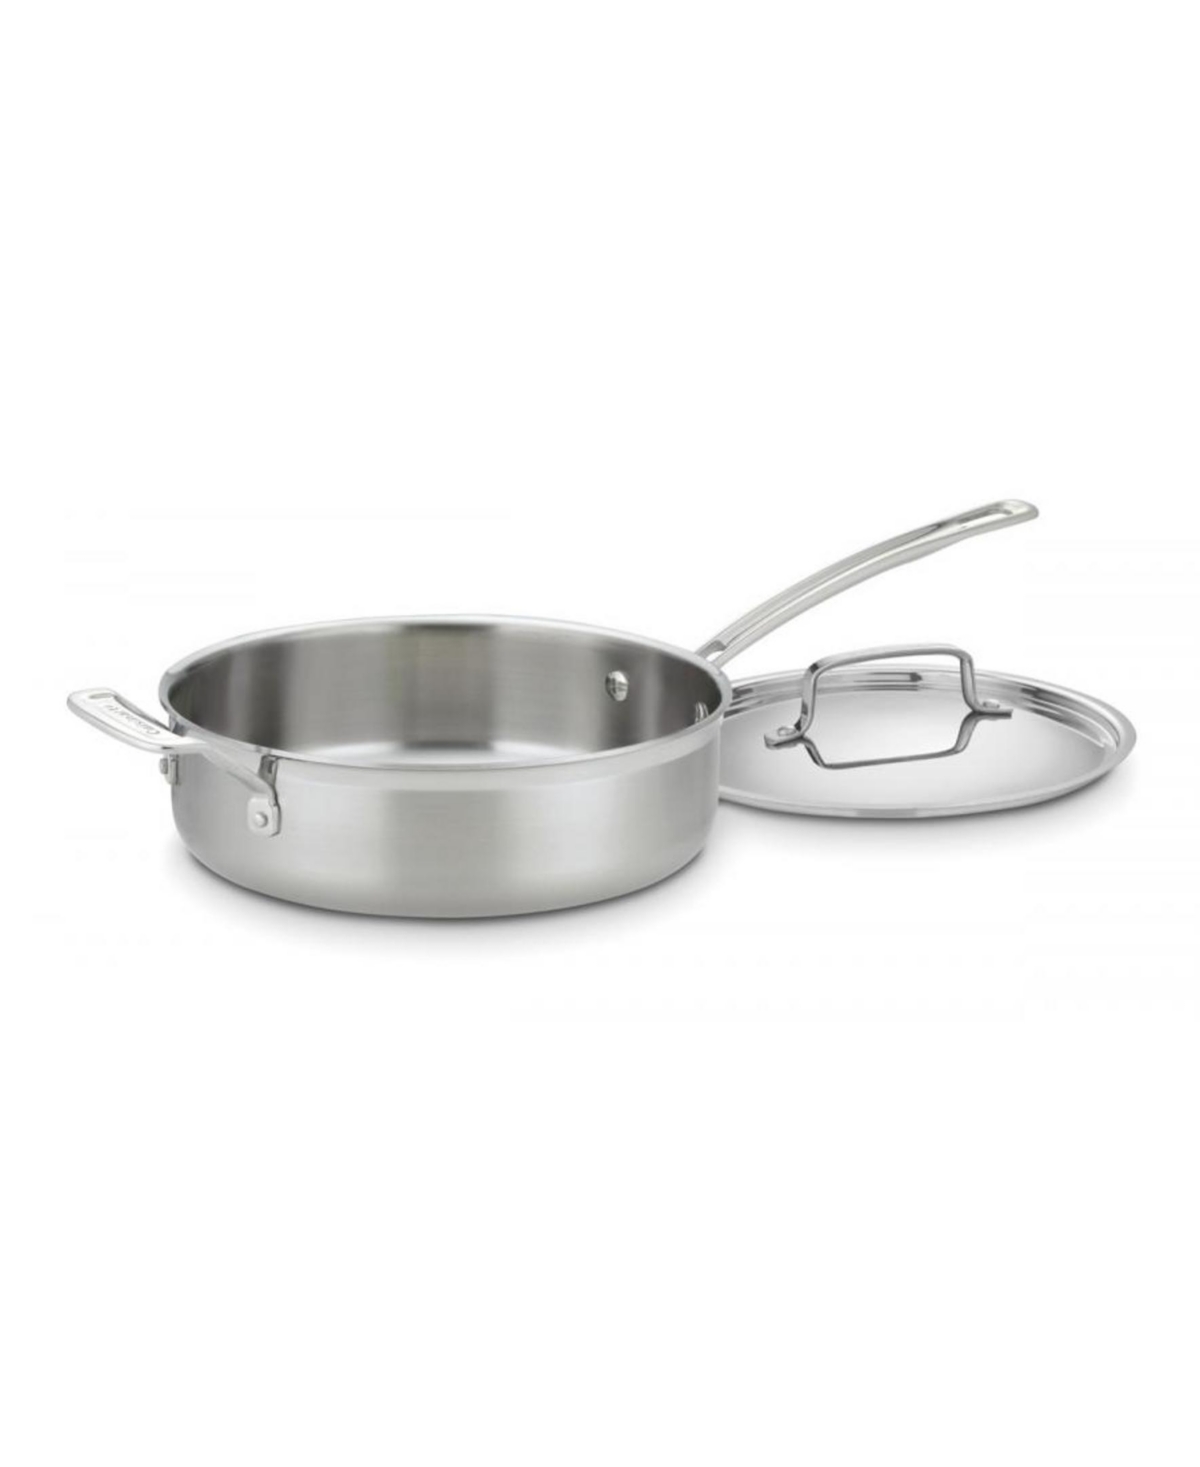 Cuisinart Multiclad Pro 3.5-qt. Saute Pan With Cover In Stainless Steel